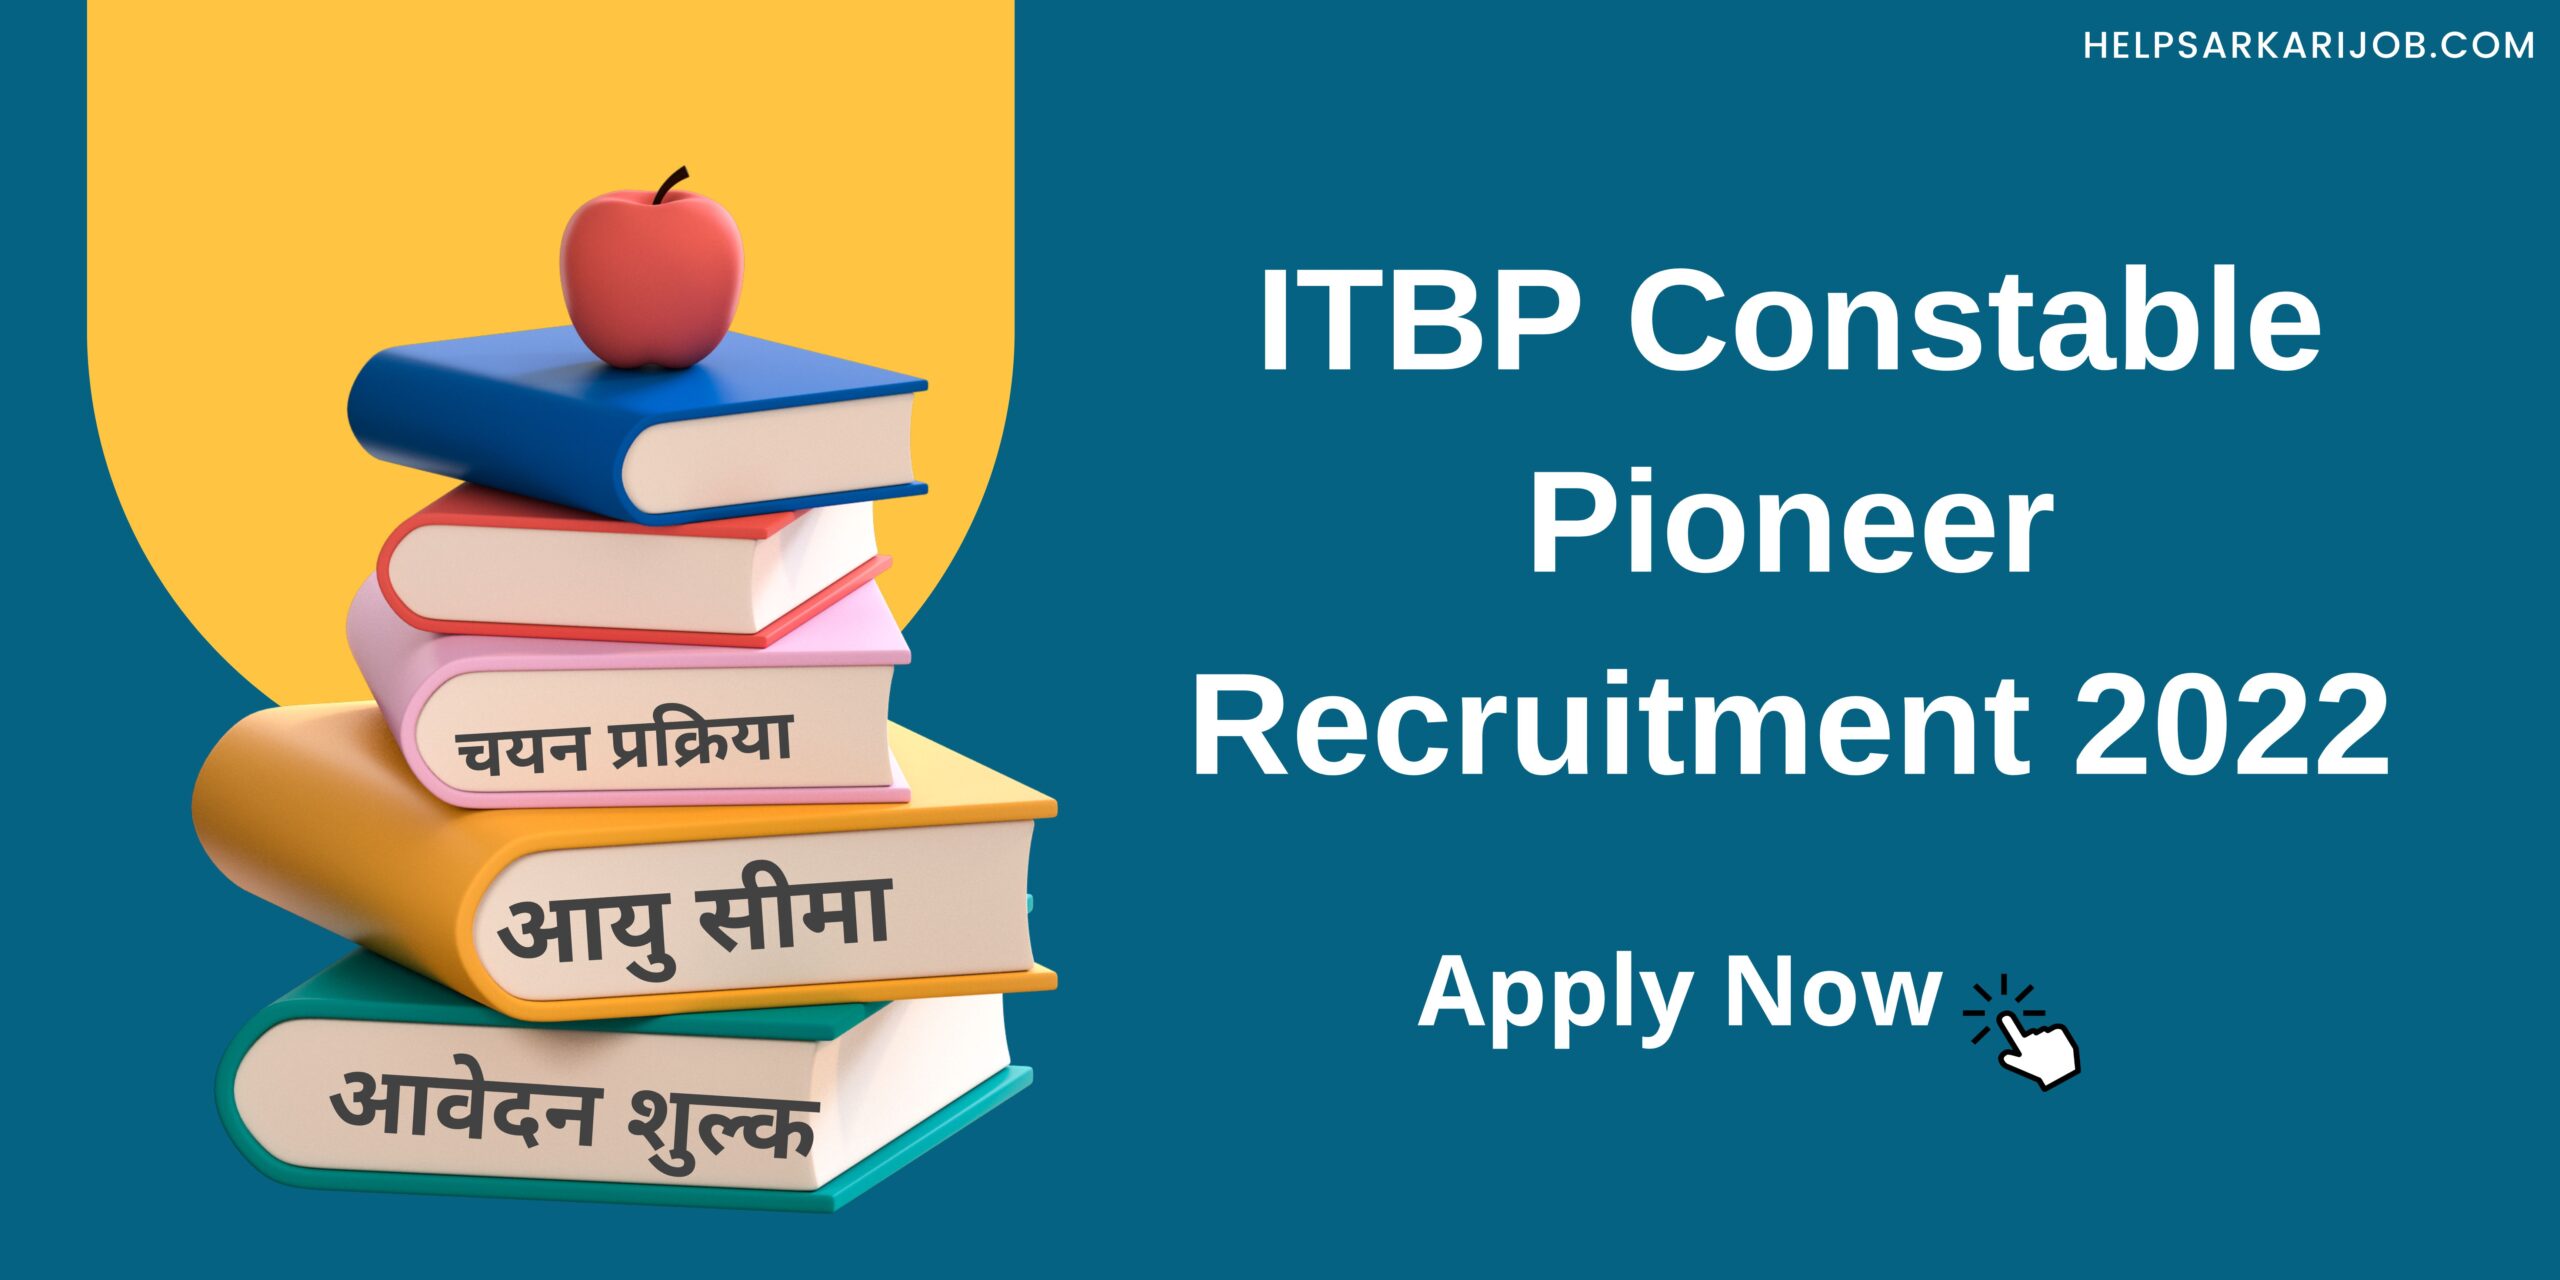 ITBP Constable Pioneer Recruitment 2022 scaled -